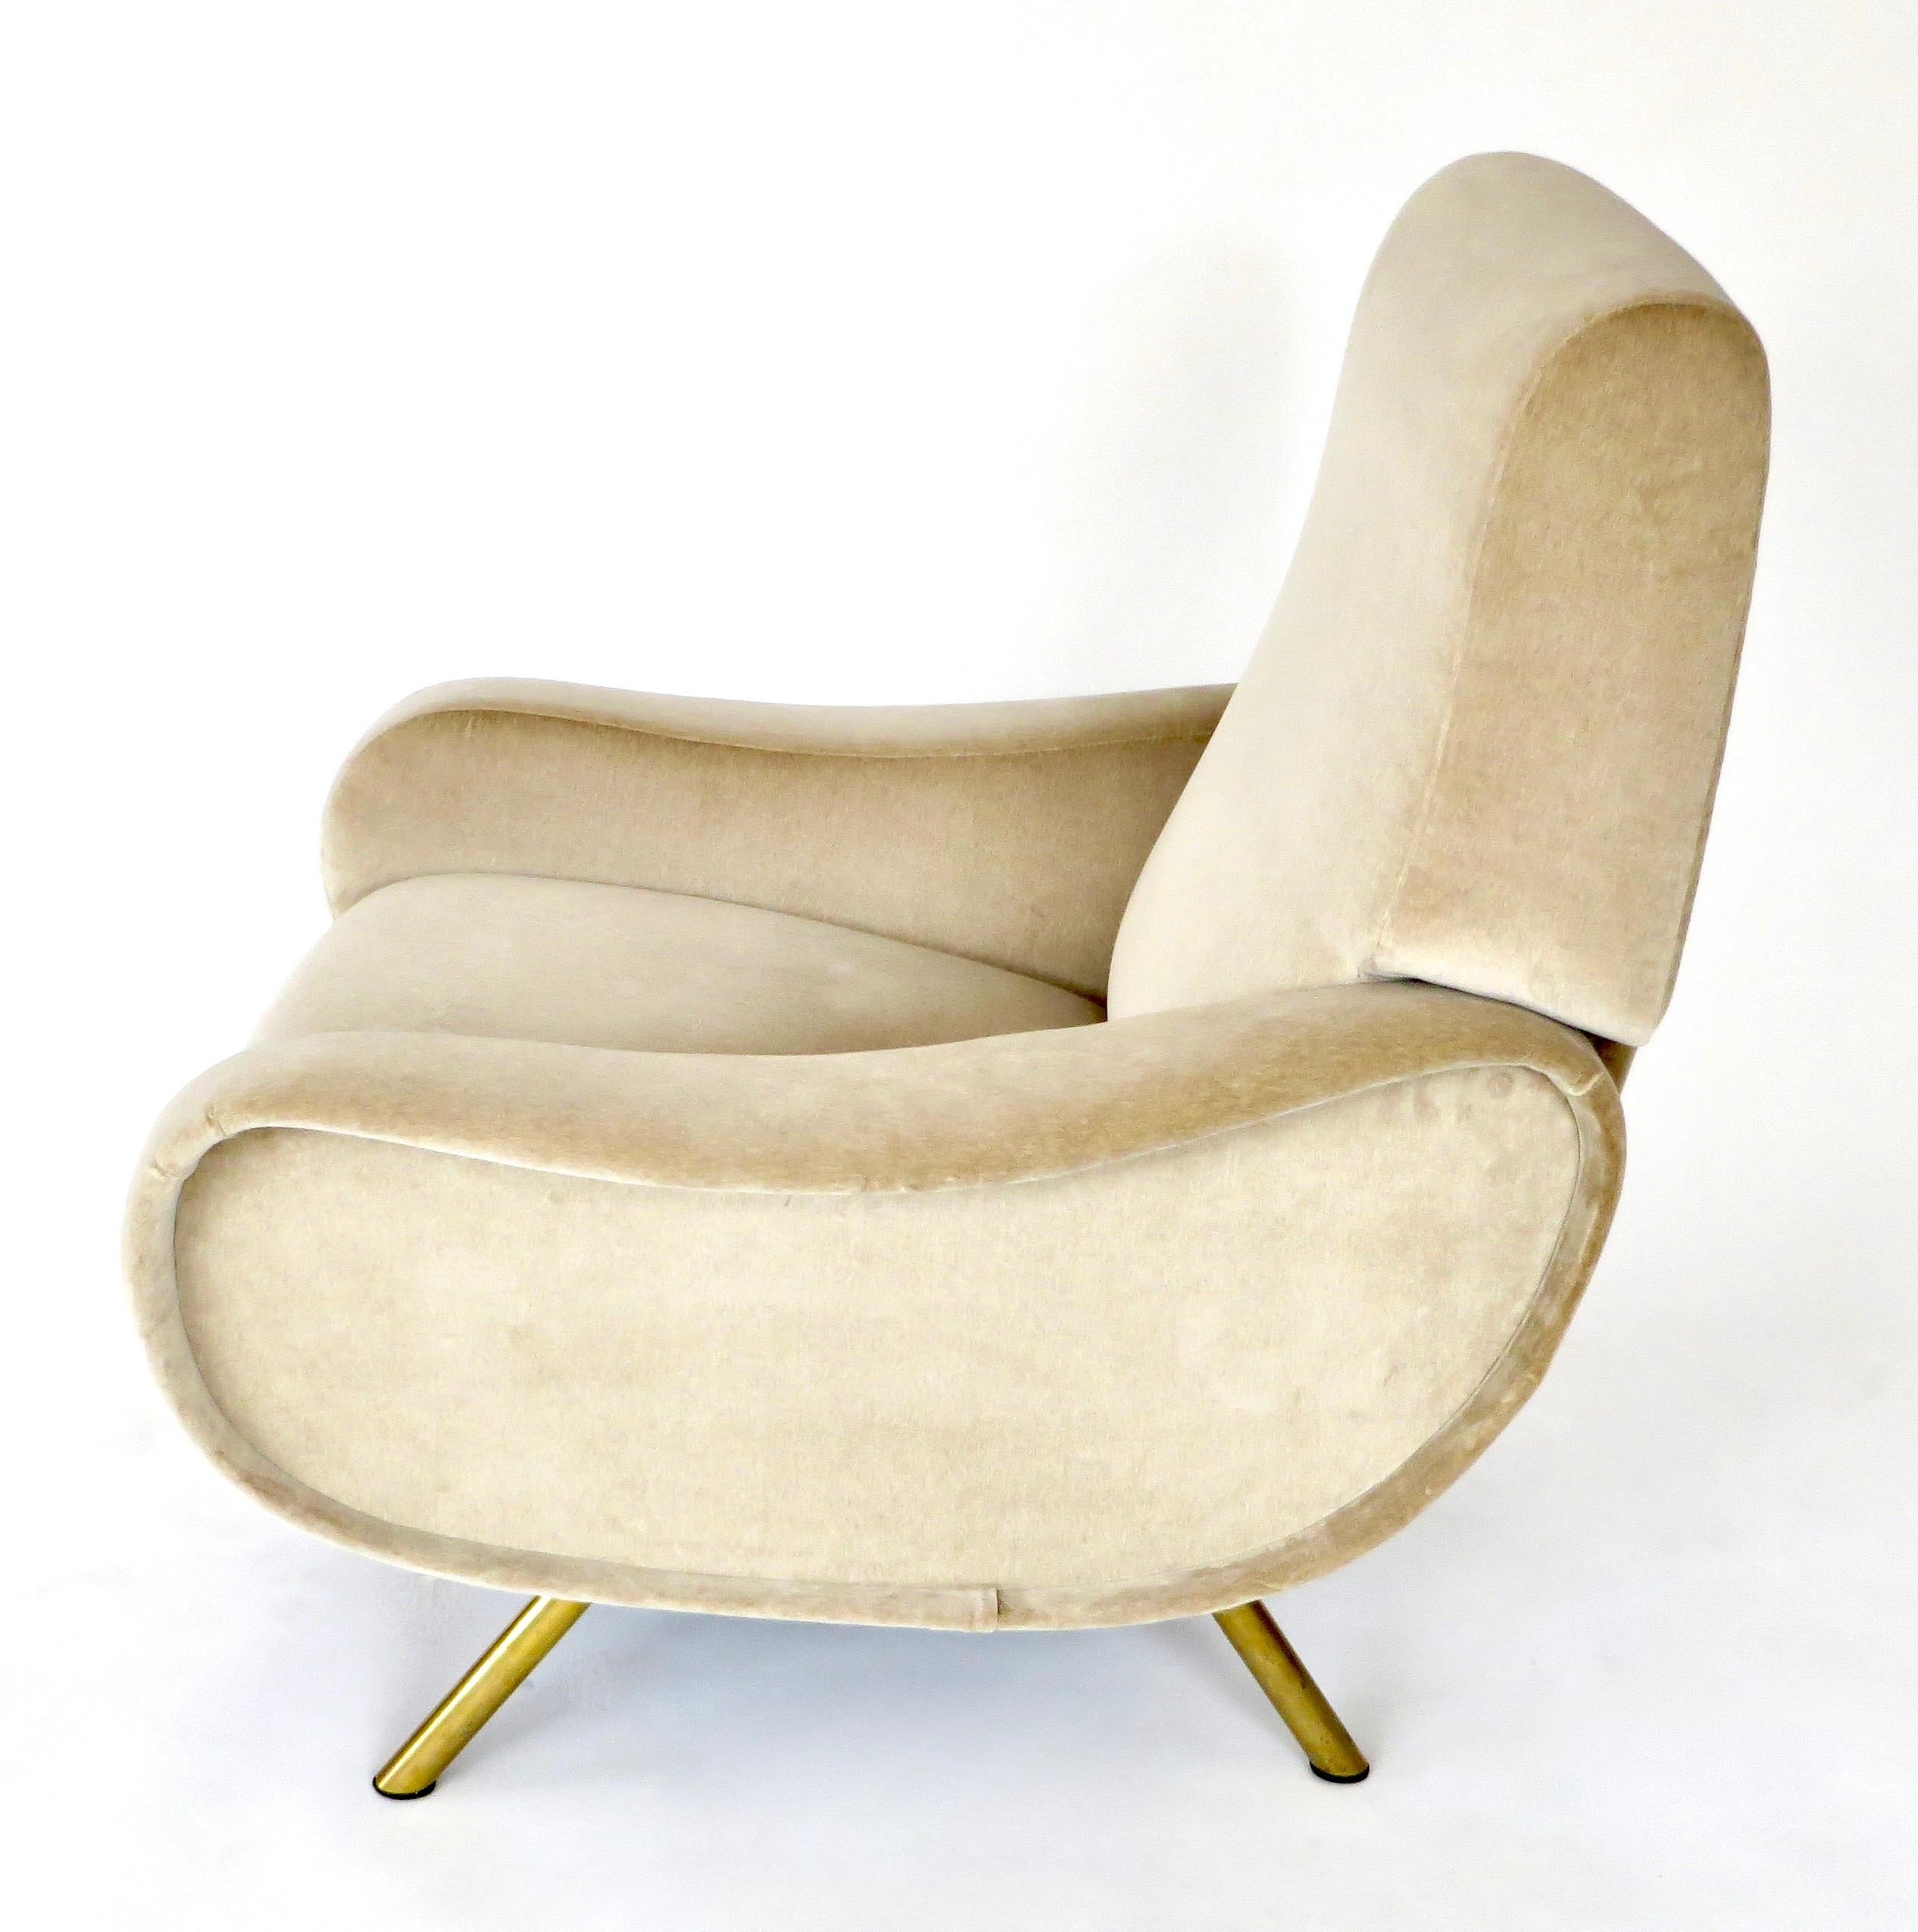 The lady chair was designed by Marco Zanuso for Arflex in 1951. It won the award Medaglia d’oro or Gold Medal at the Milan IX Triennale in 1951. Newly restored and reupholstered in Roma cream velvet. Arflex label. Original brass legs.

Reference: